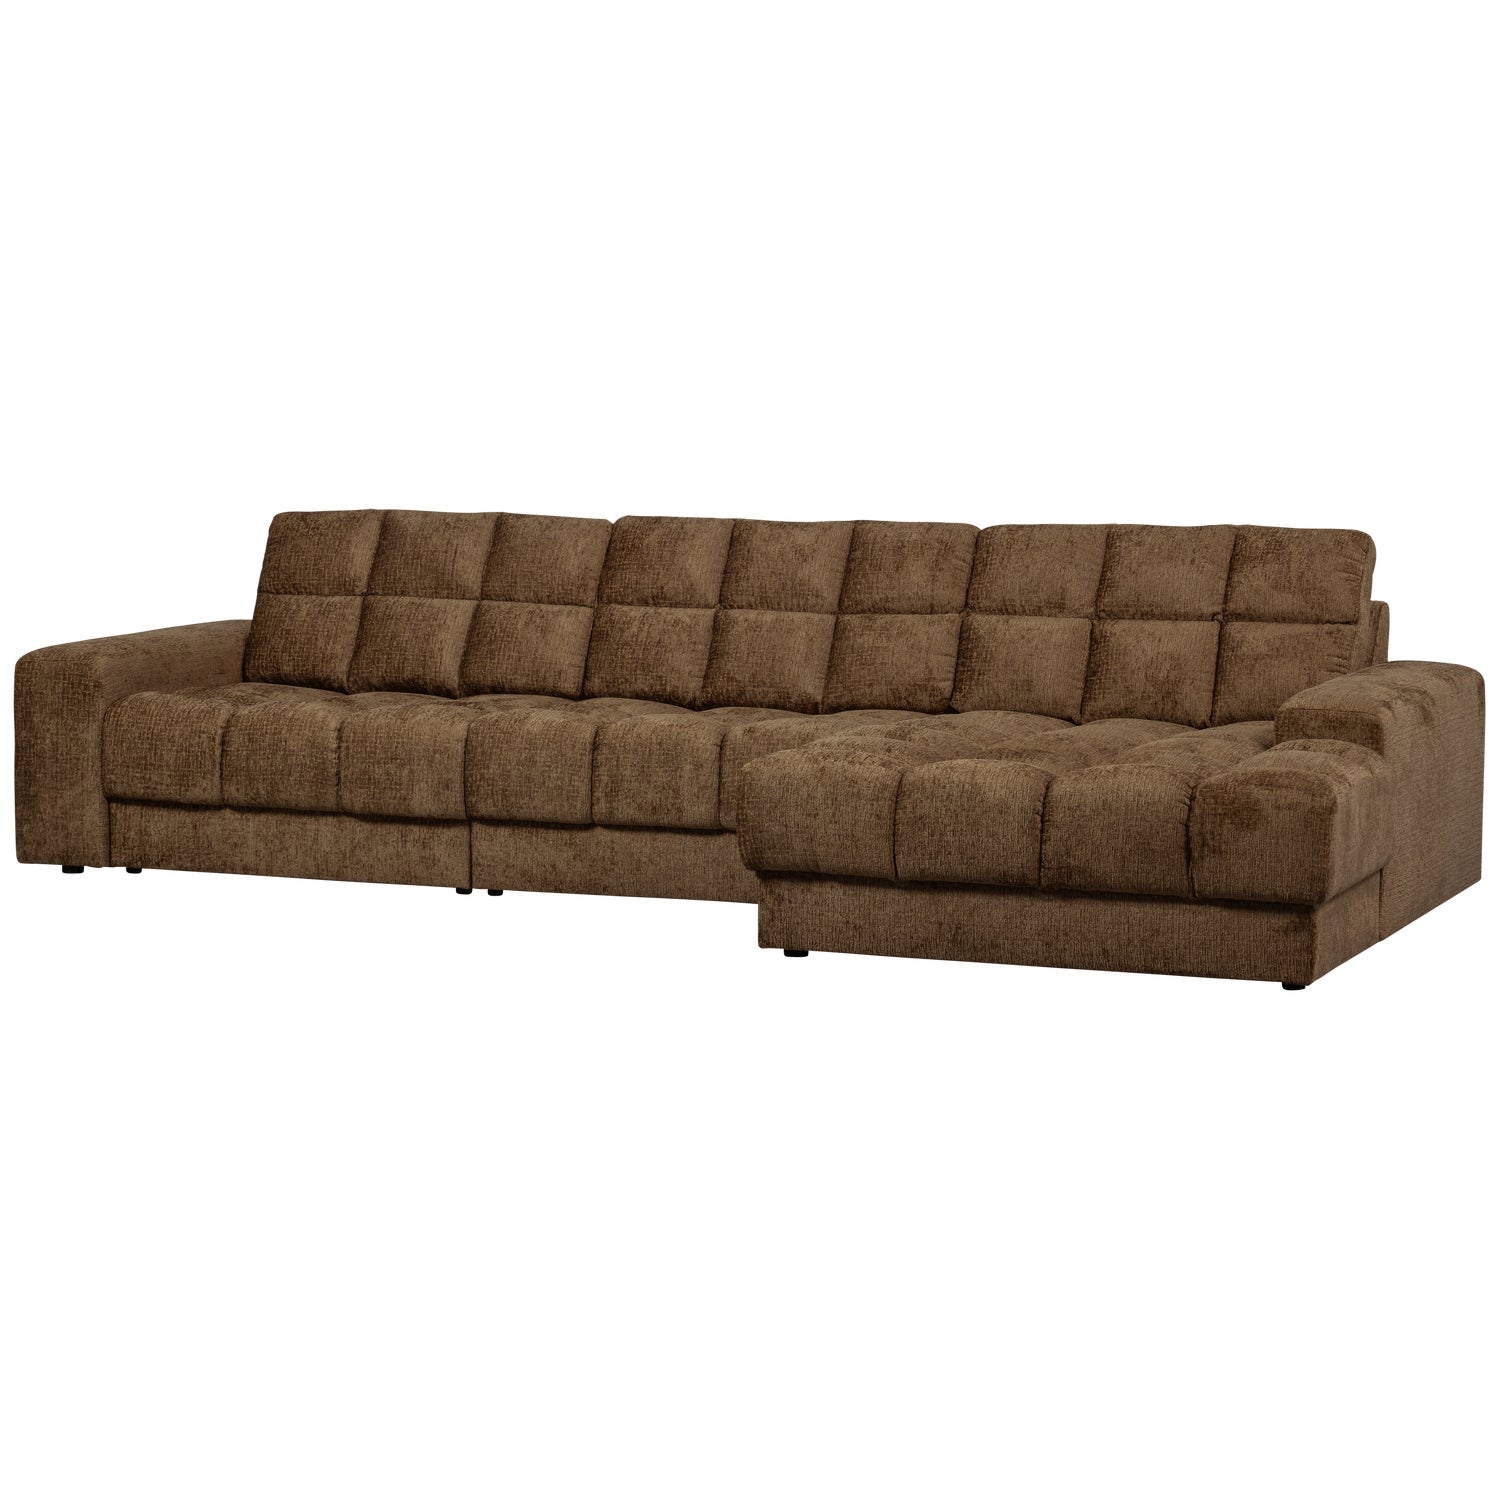 379013-BR-02_VS_WE_Second_date_chaise_longue_rechts_structure_velvet_brass_SA.png?auto=webp&format=png&width=1500&height=1500